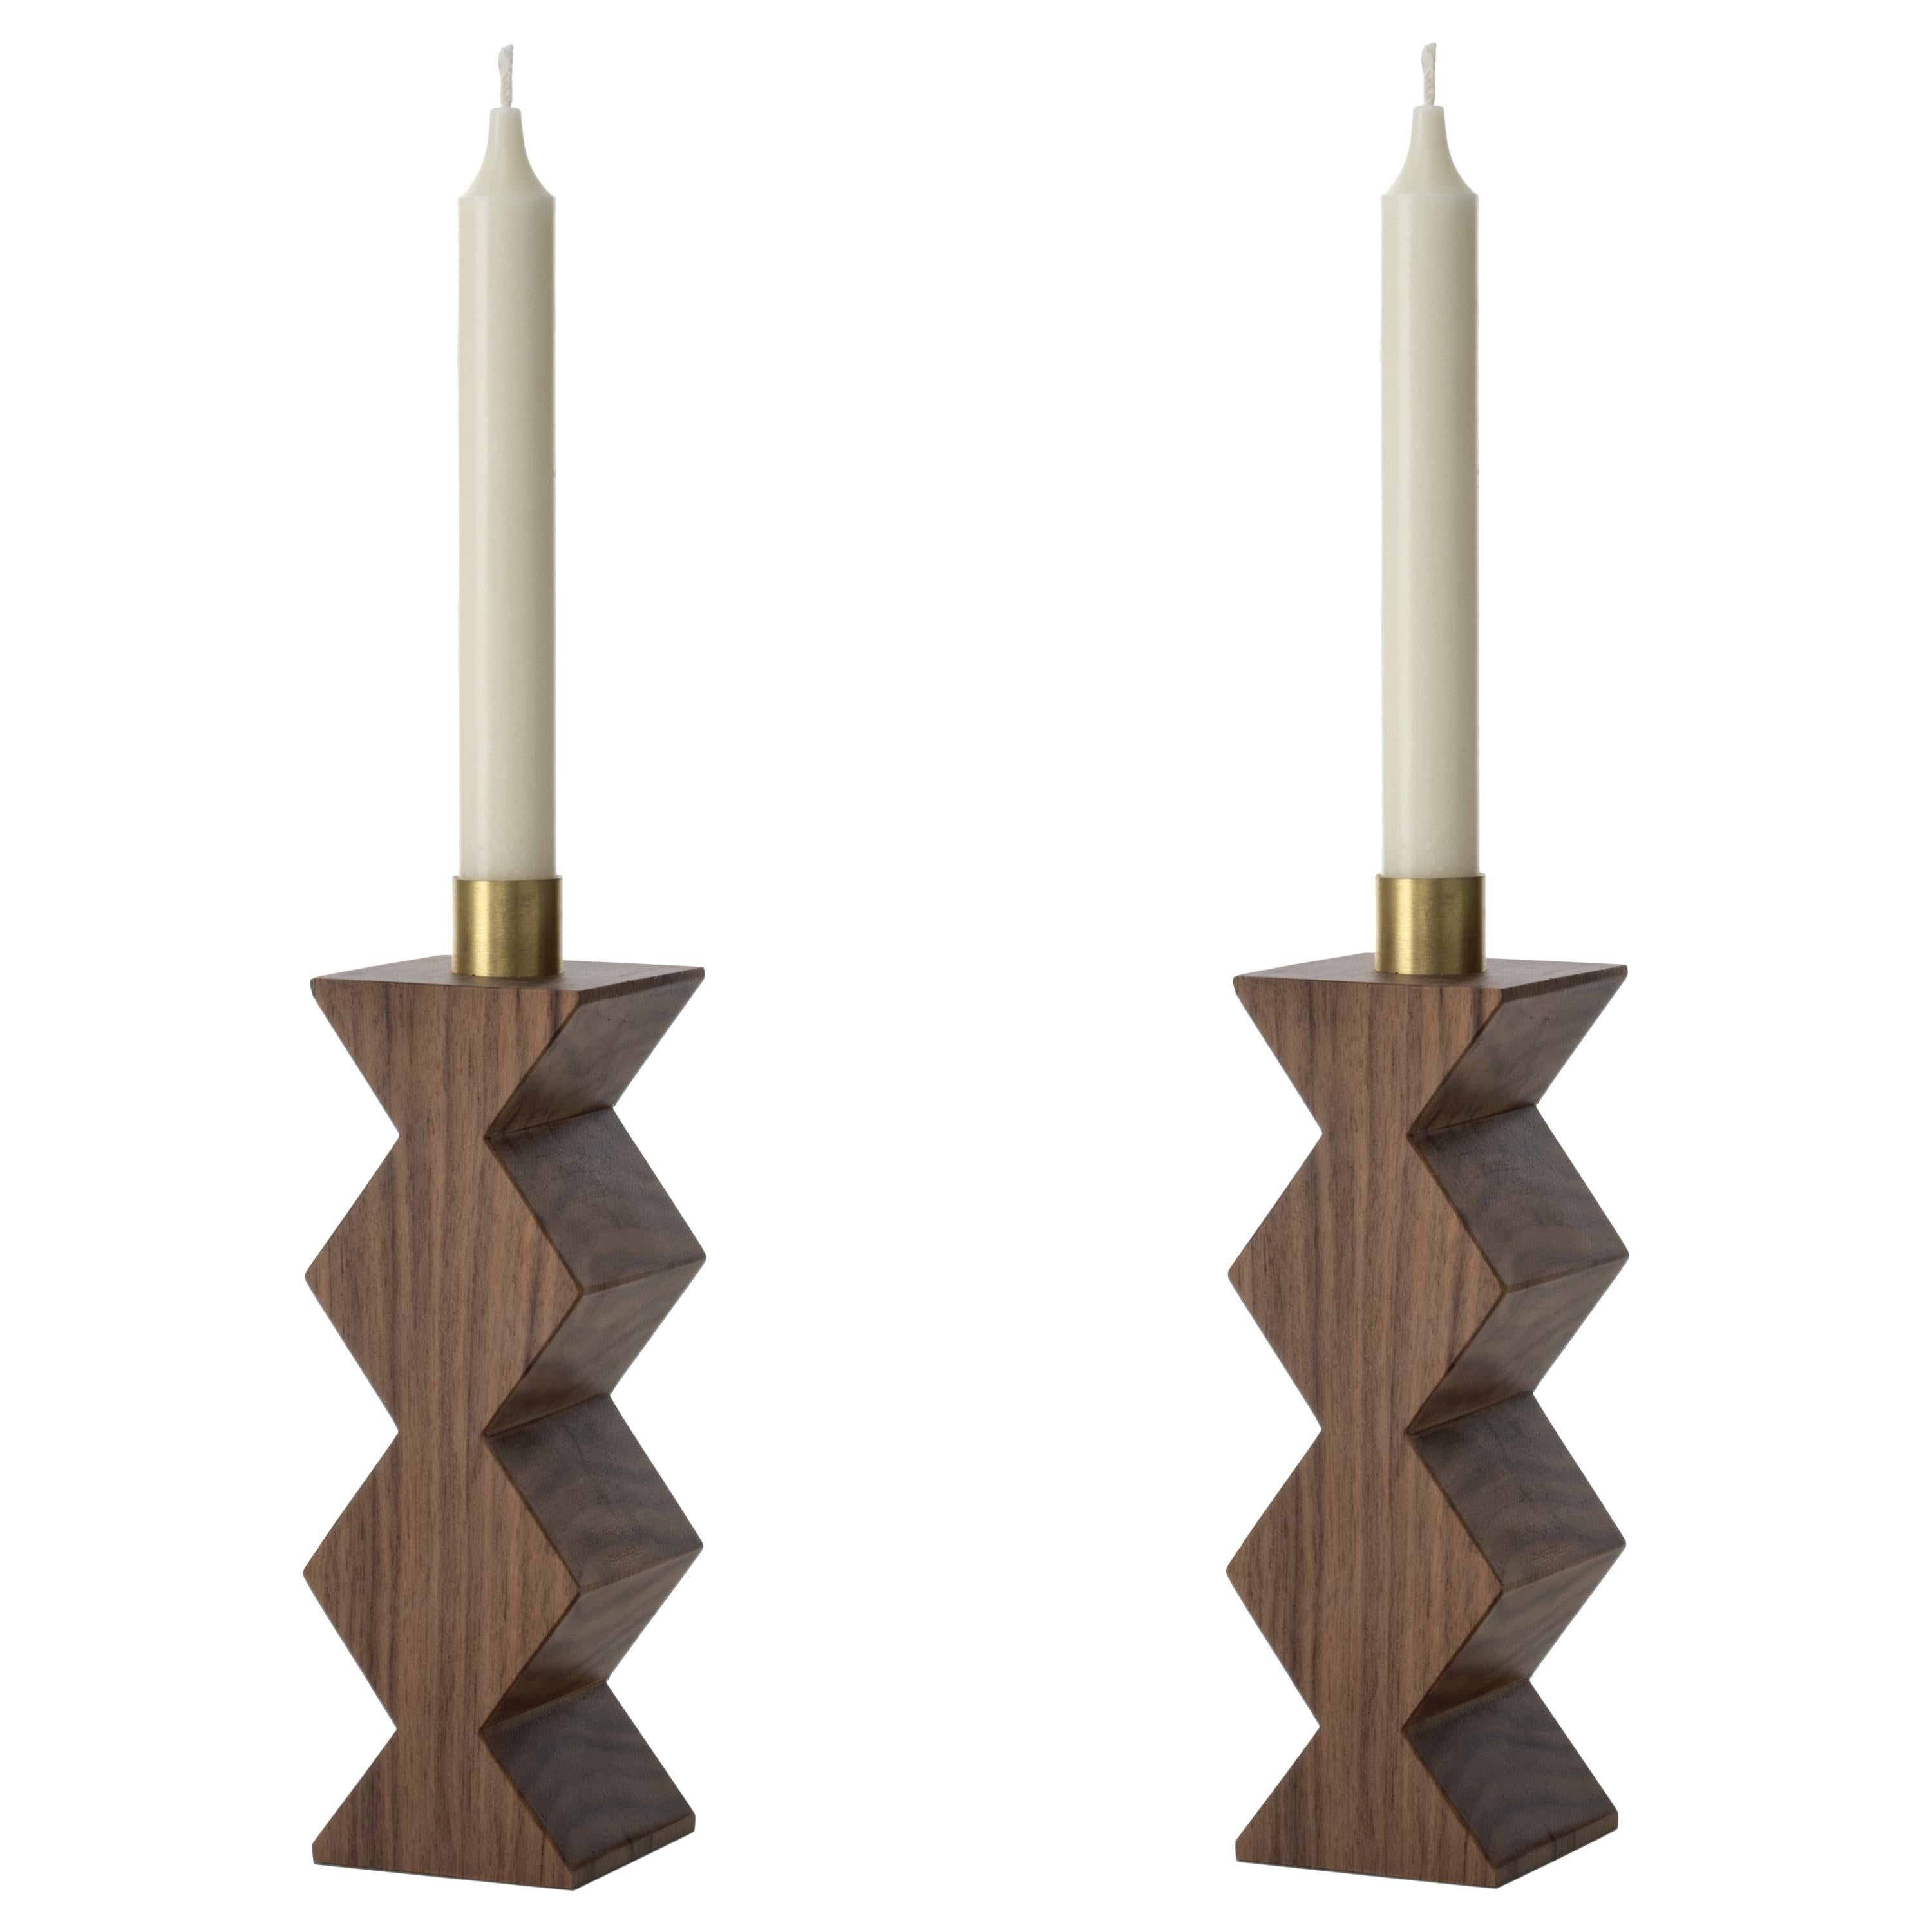 Constantin III Set of Two Candleholders in Natural Walnut and Brass